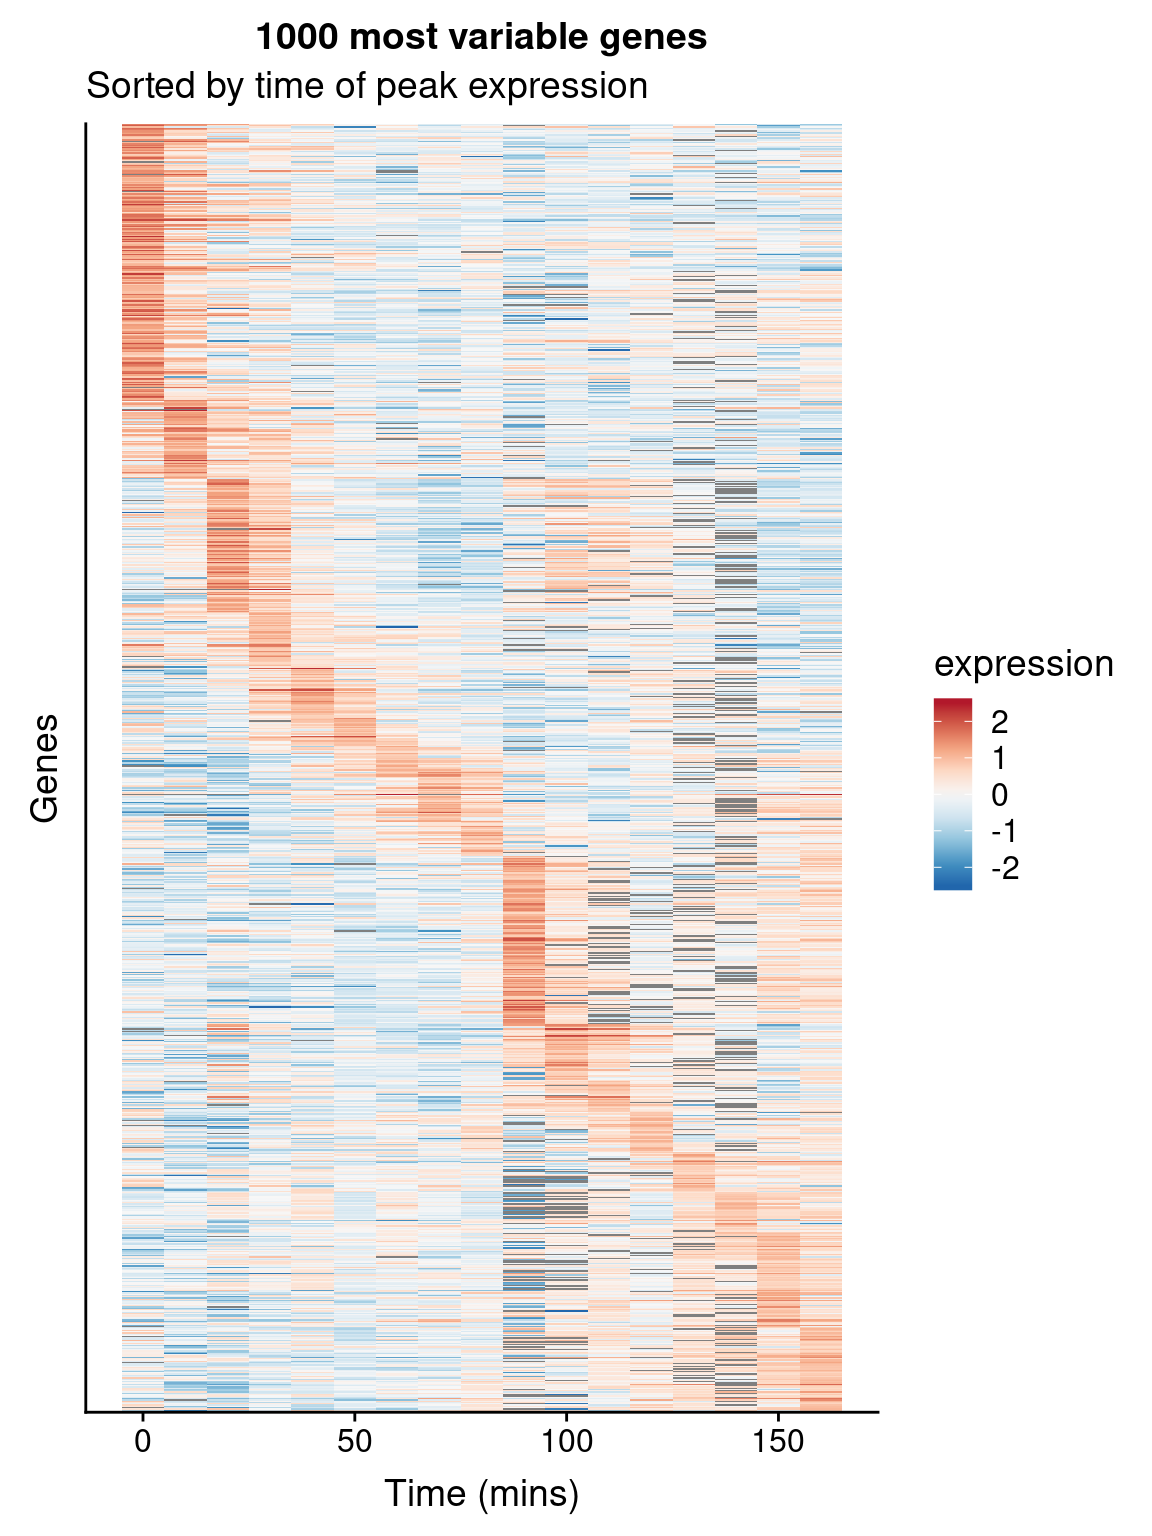 A Heatmap showing genes in the cdc28 experiment, sorted by peak expression